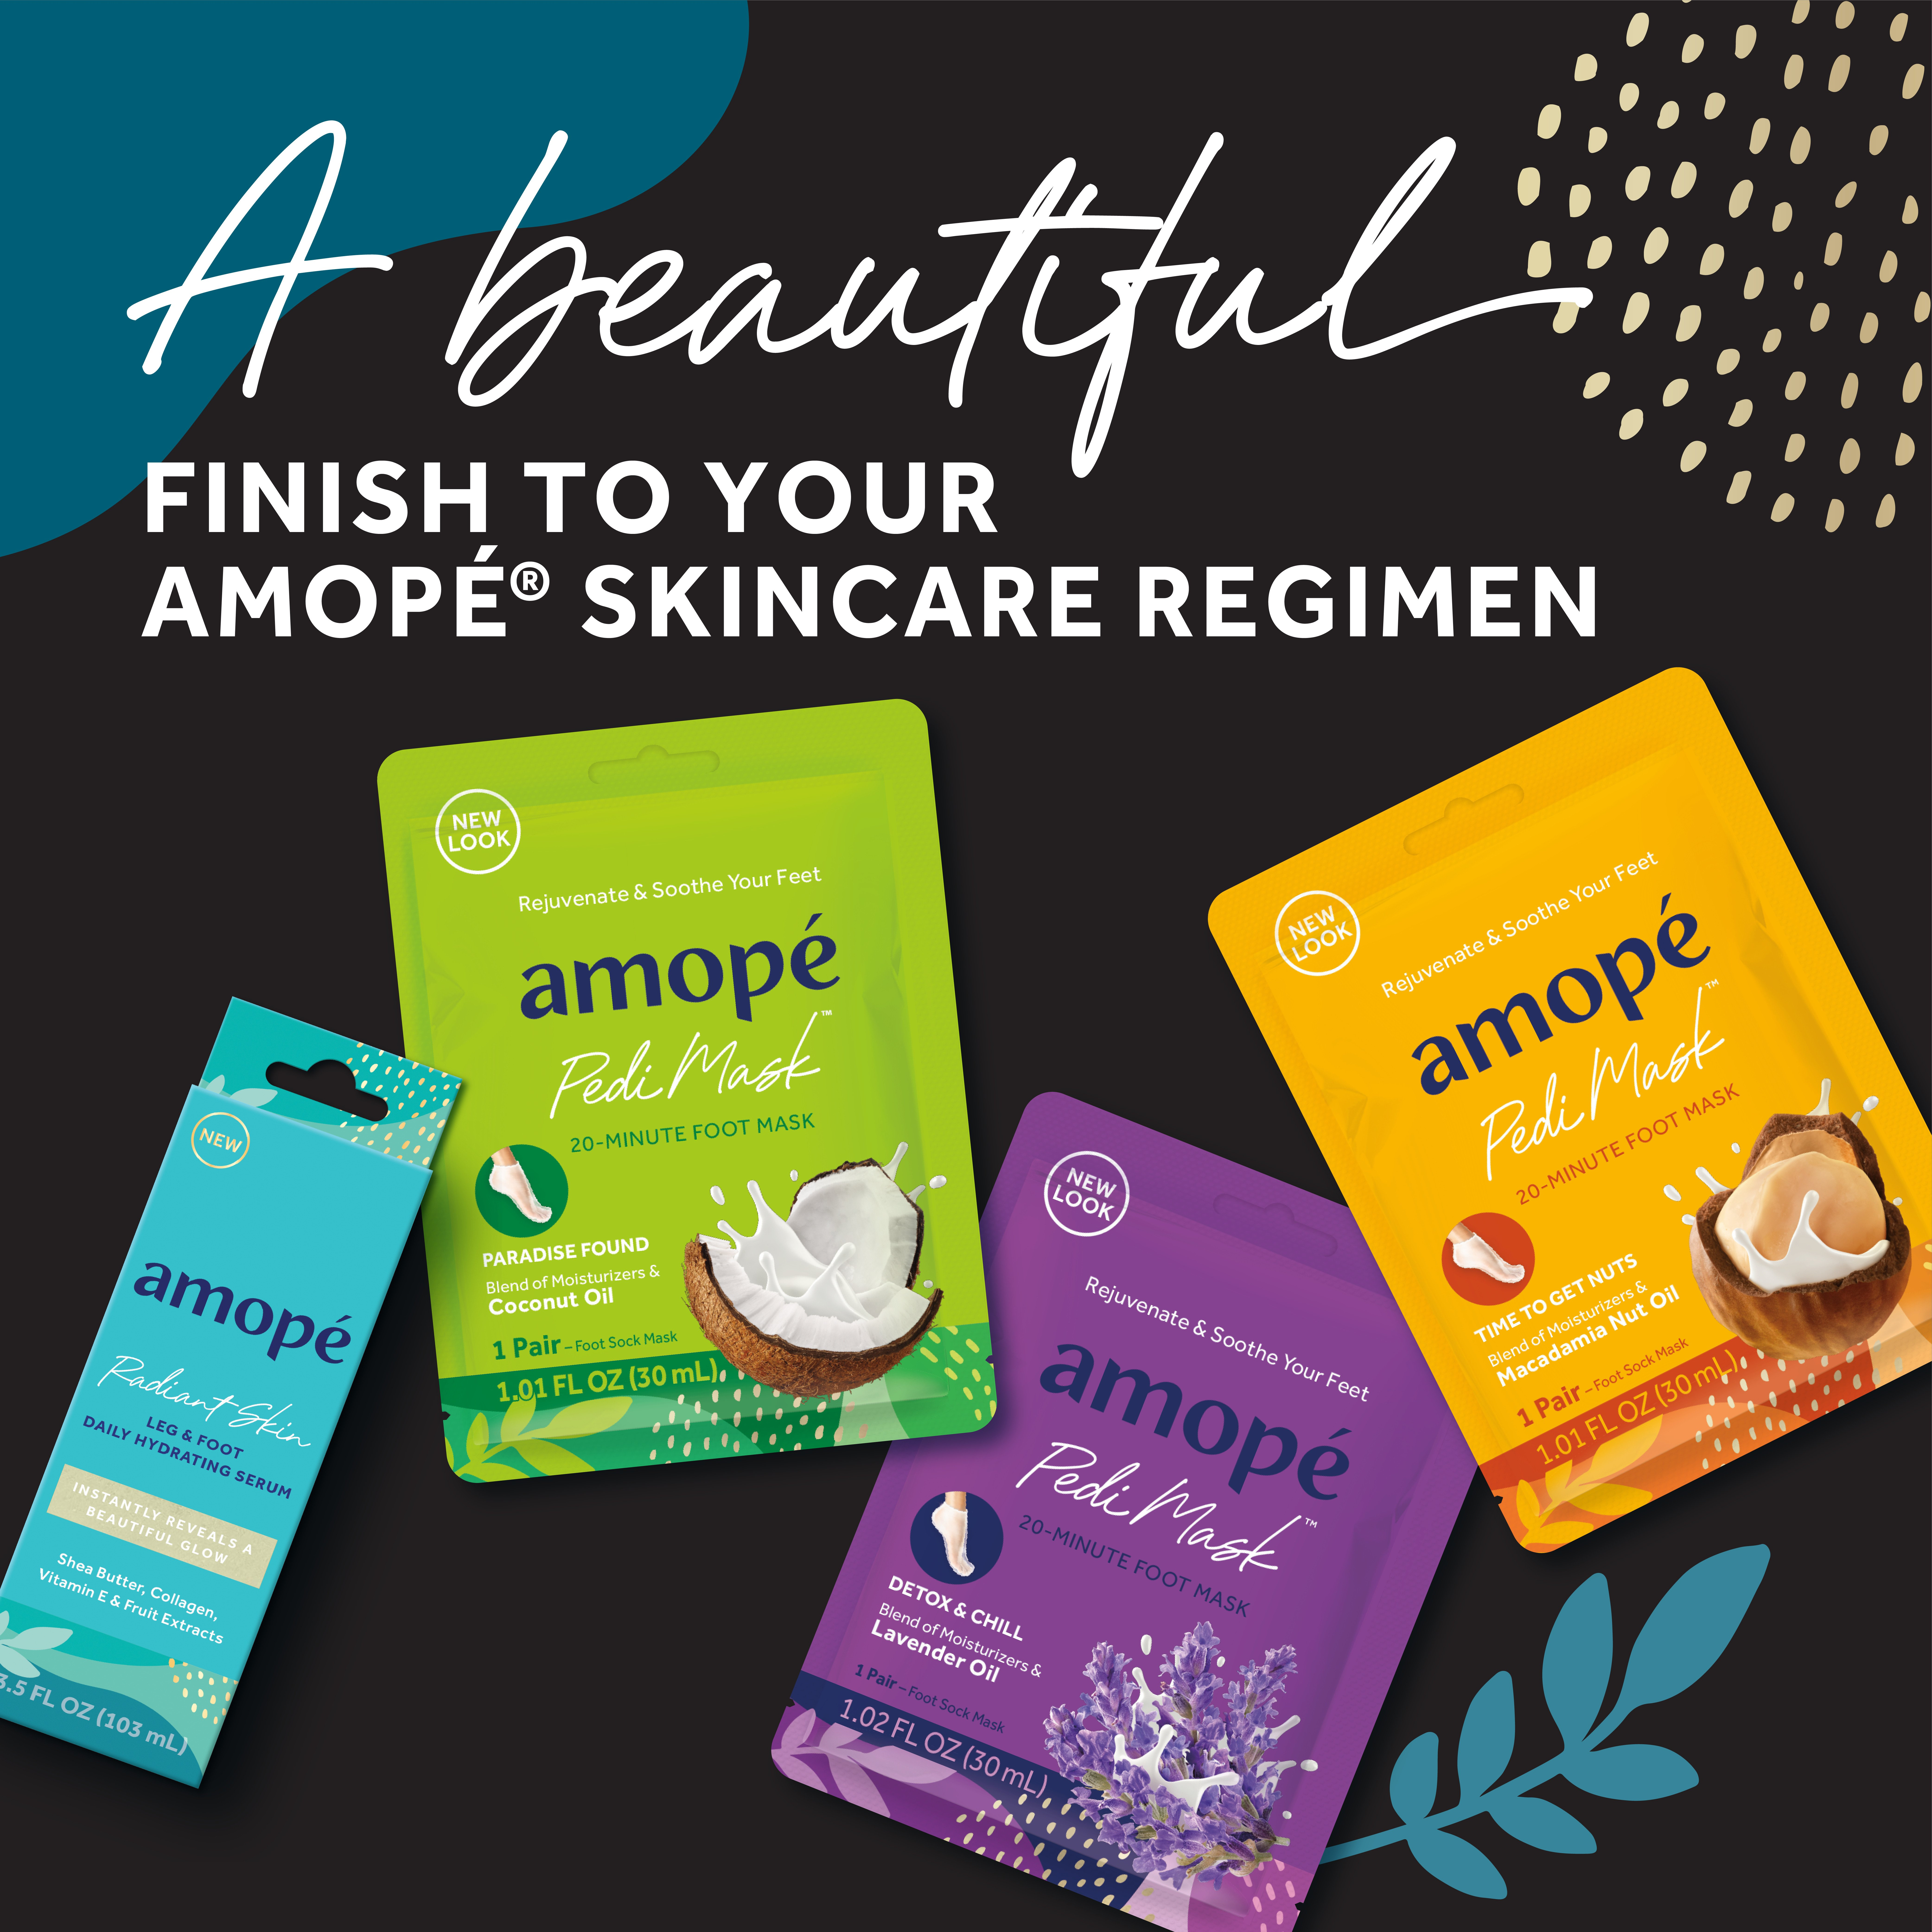 Amope Pedi Perfect™ Expands Its Revolutionary Foot Care Portfolio with  Electronic Nail Care System And New And Improved Foot File With Diamond  Crystals